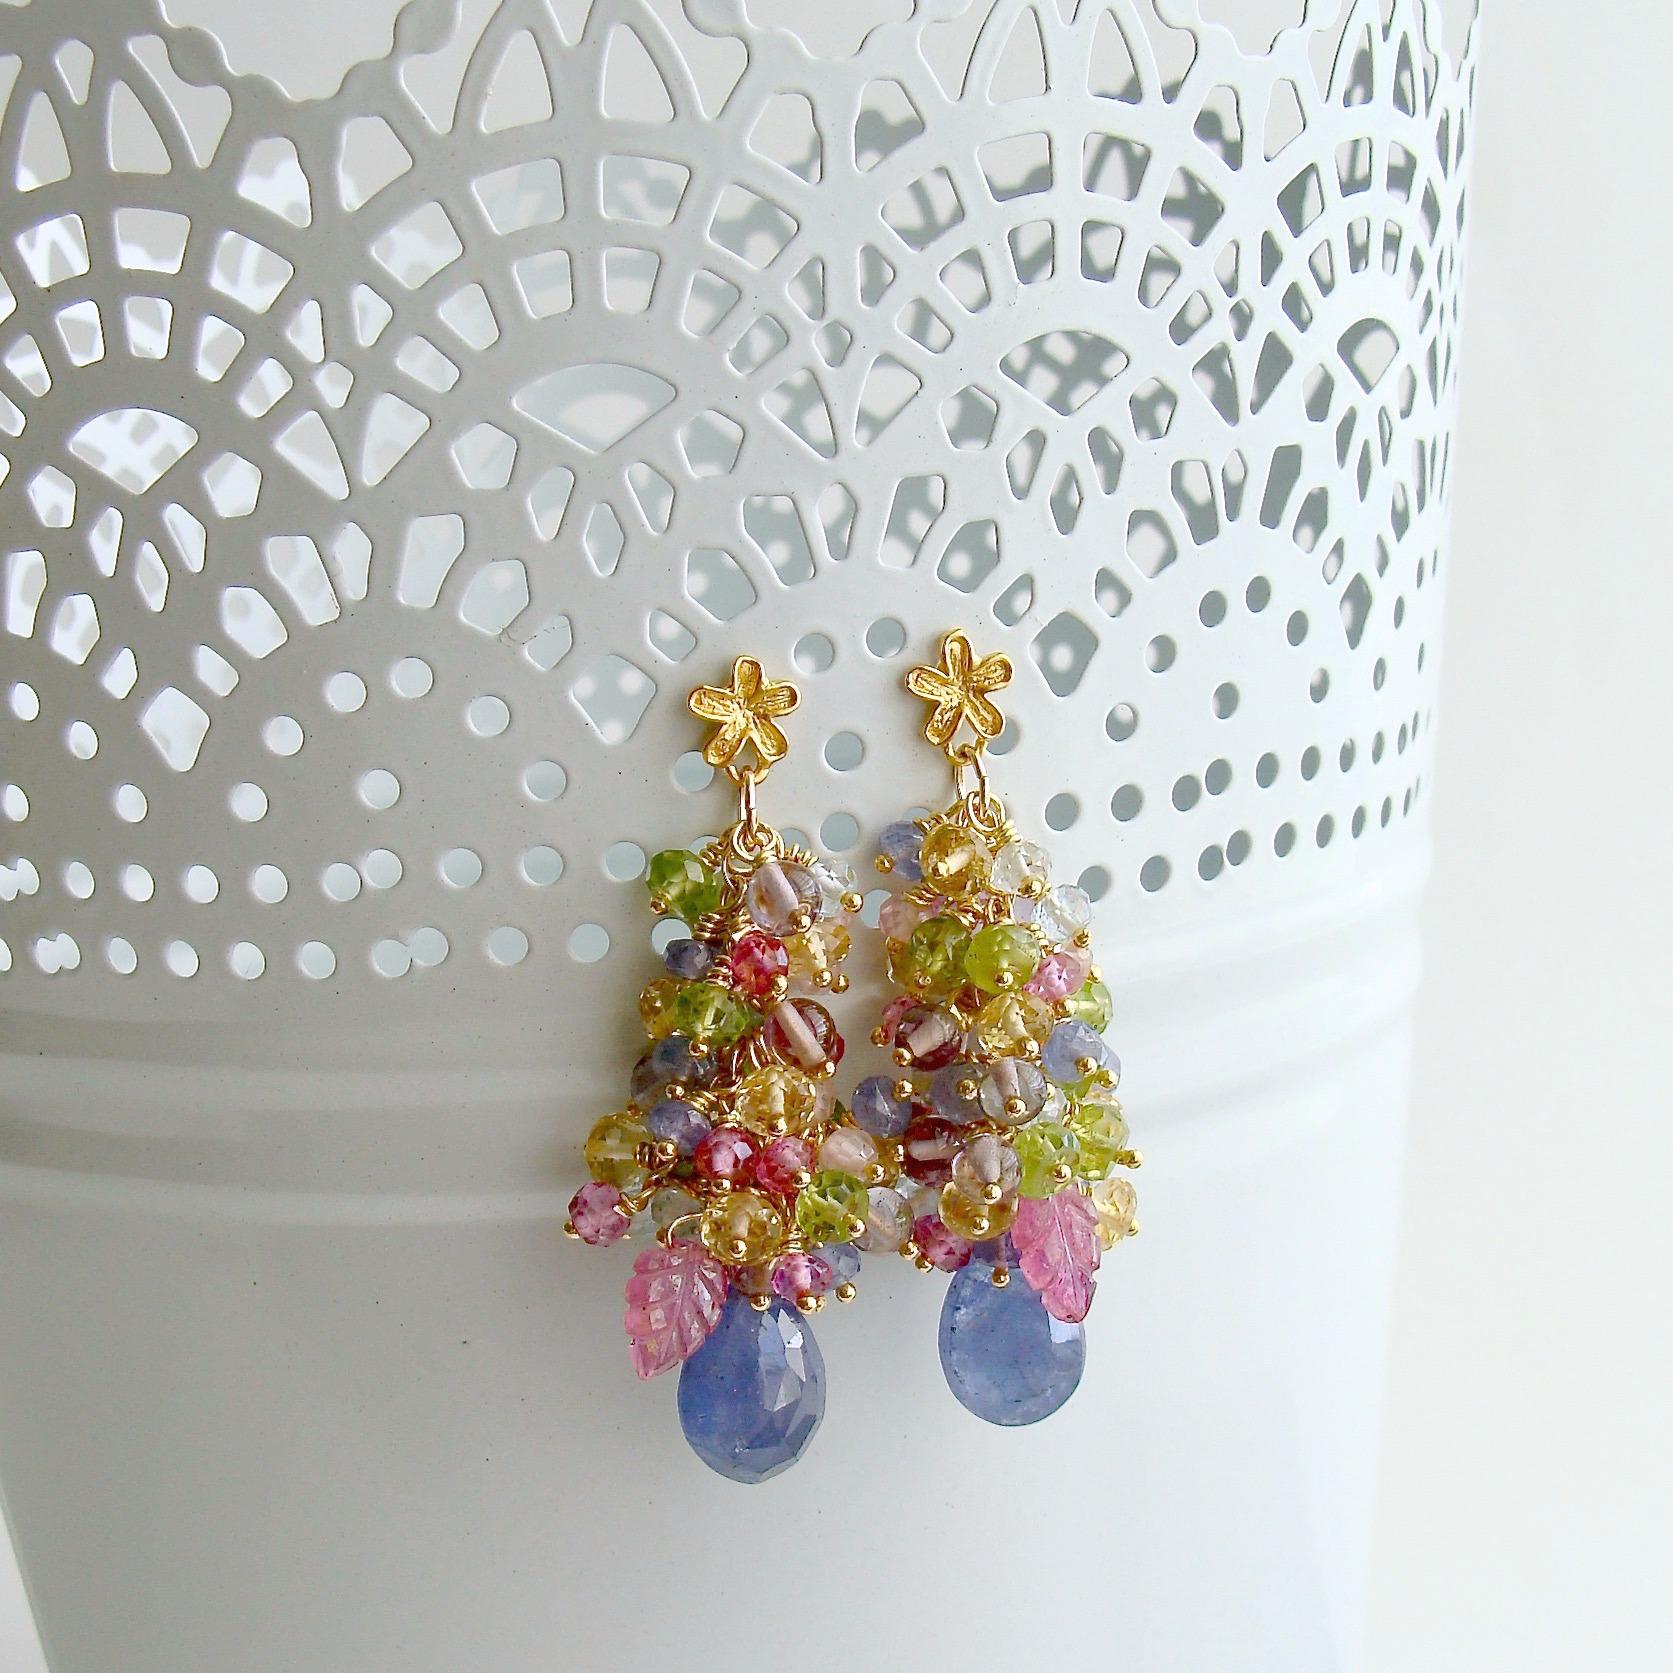 Fleur VI Earrings.

After a harsh and cold winter, everyone is ready for the happy colors of spring and these perennial favorite earrings don’t disappoint. A riot of pastel spring colors mimics the beautiful colors of a spring garden for a